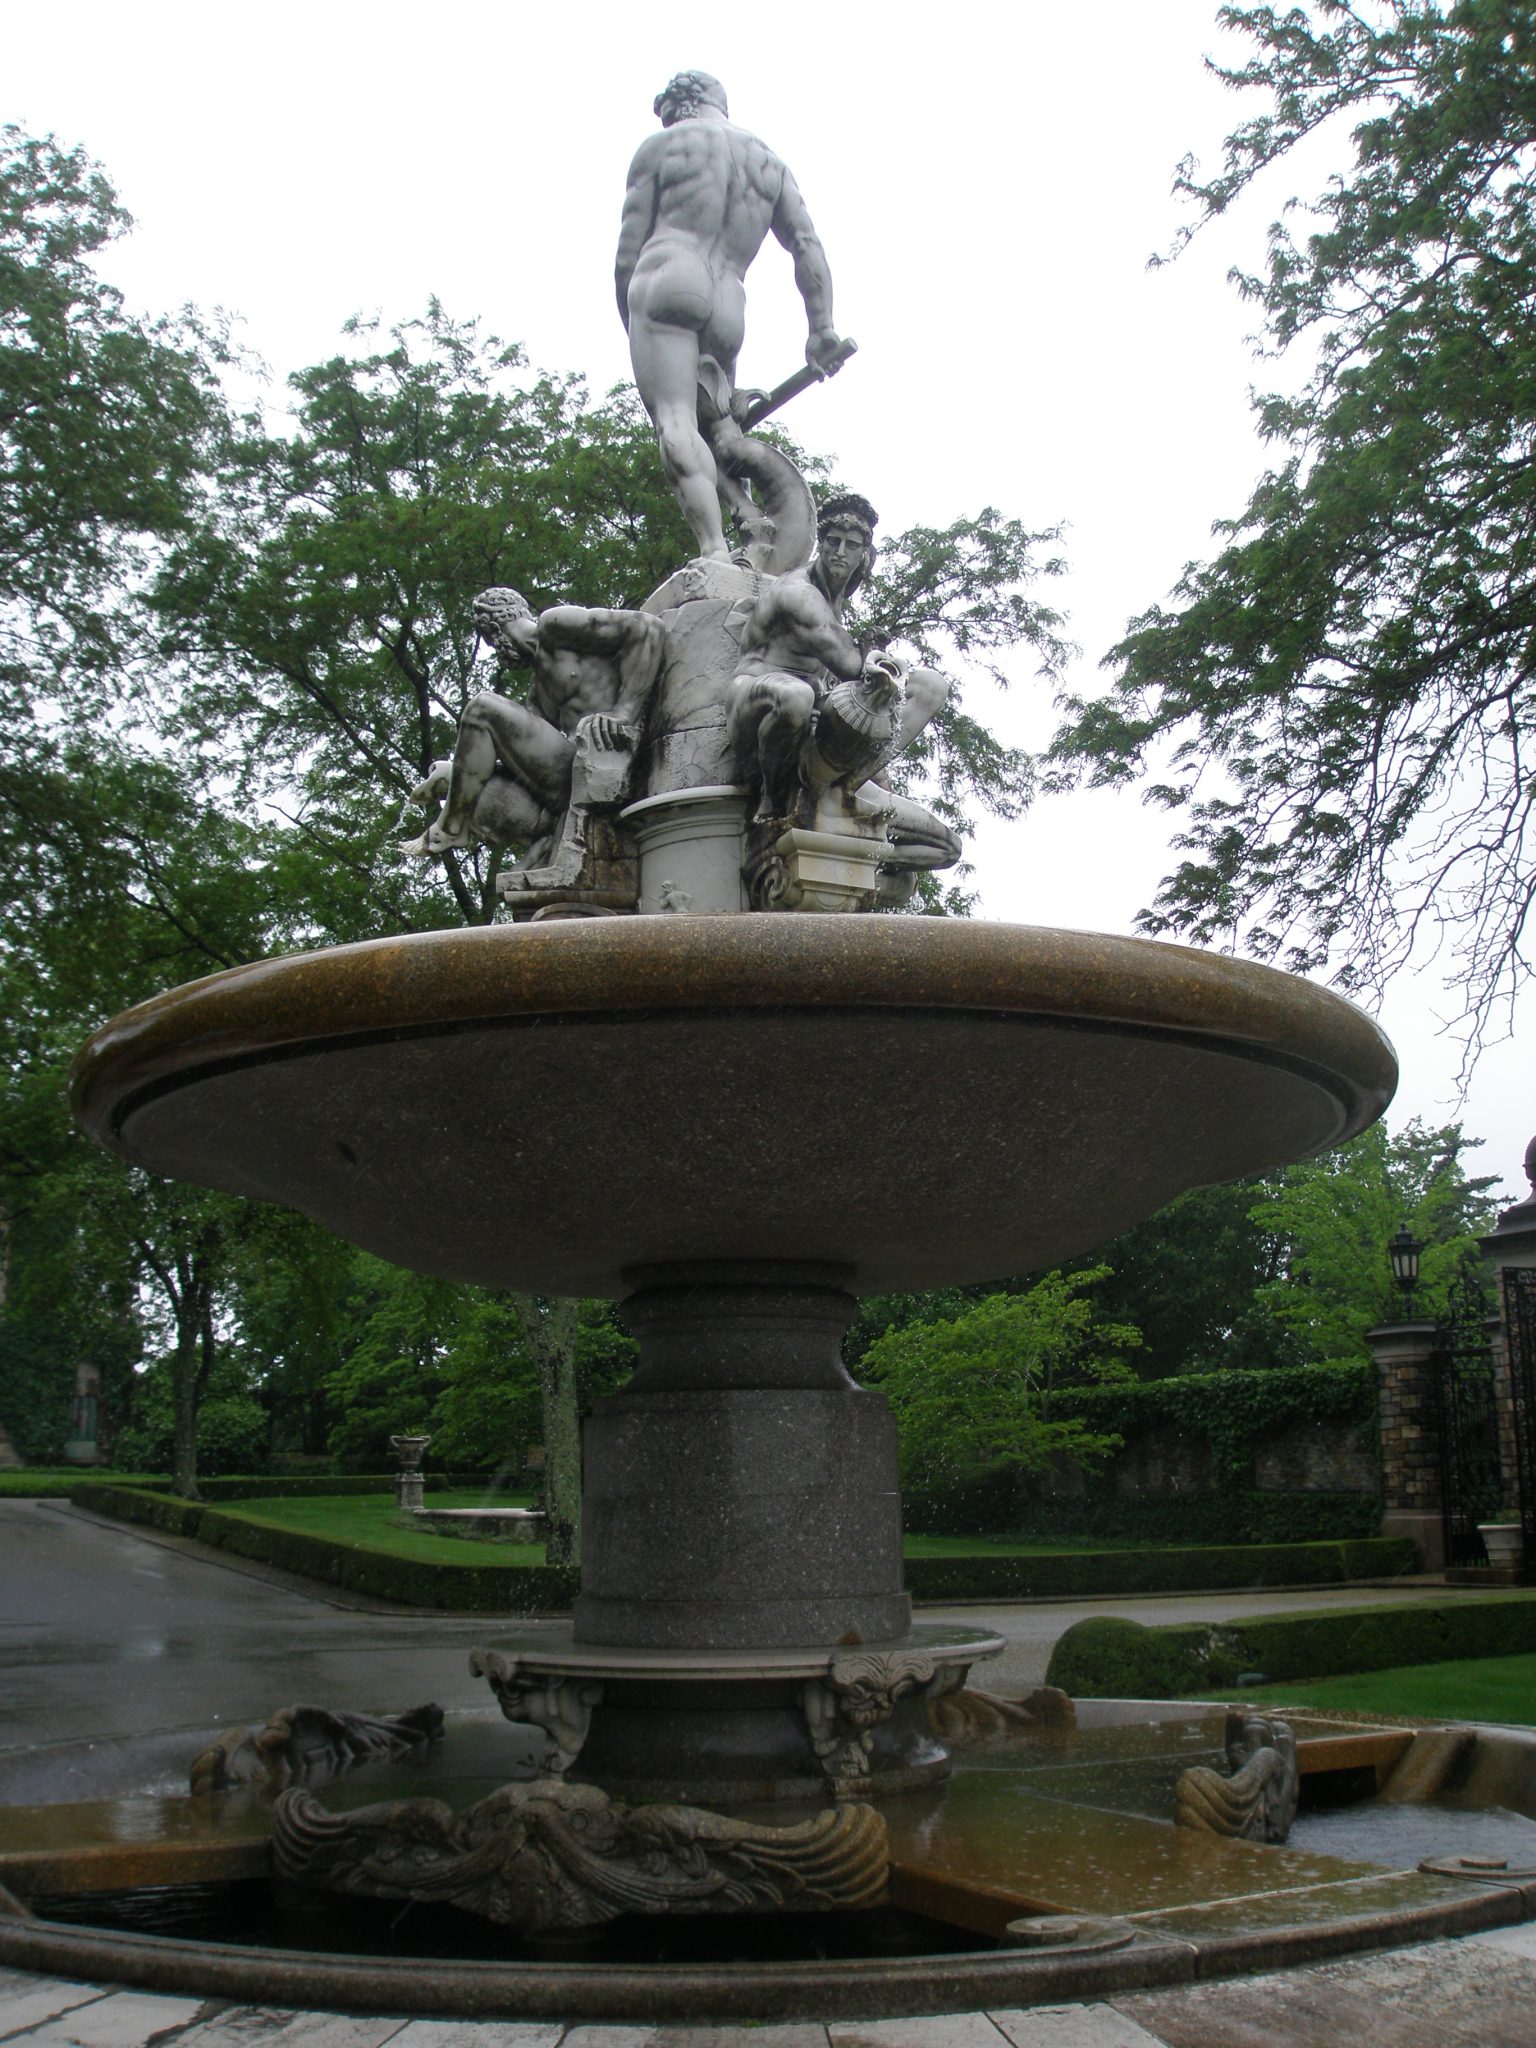 The Oceanus Fountain, seen from the top of the Grand Stairway